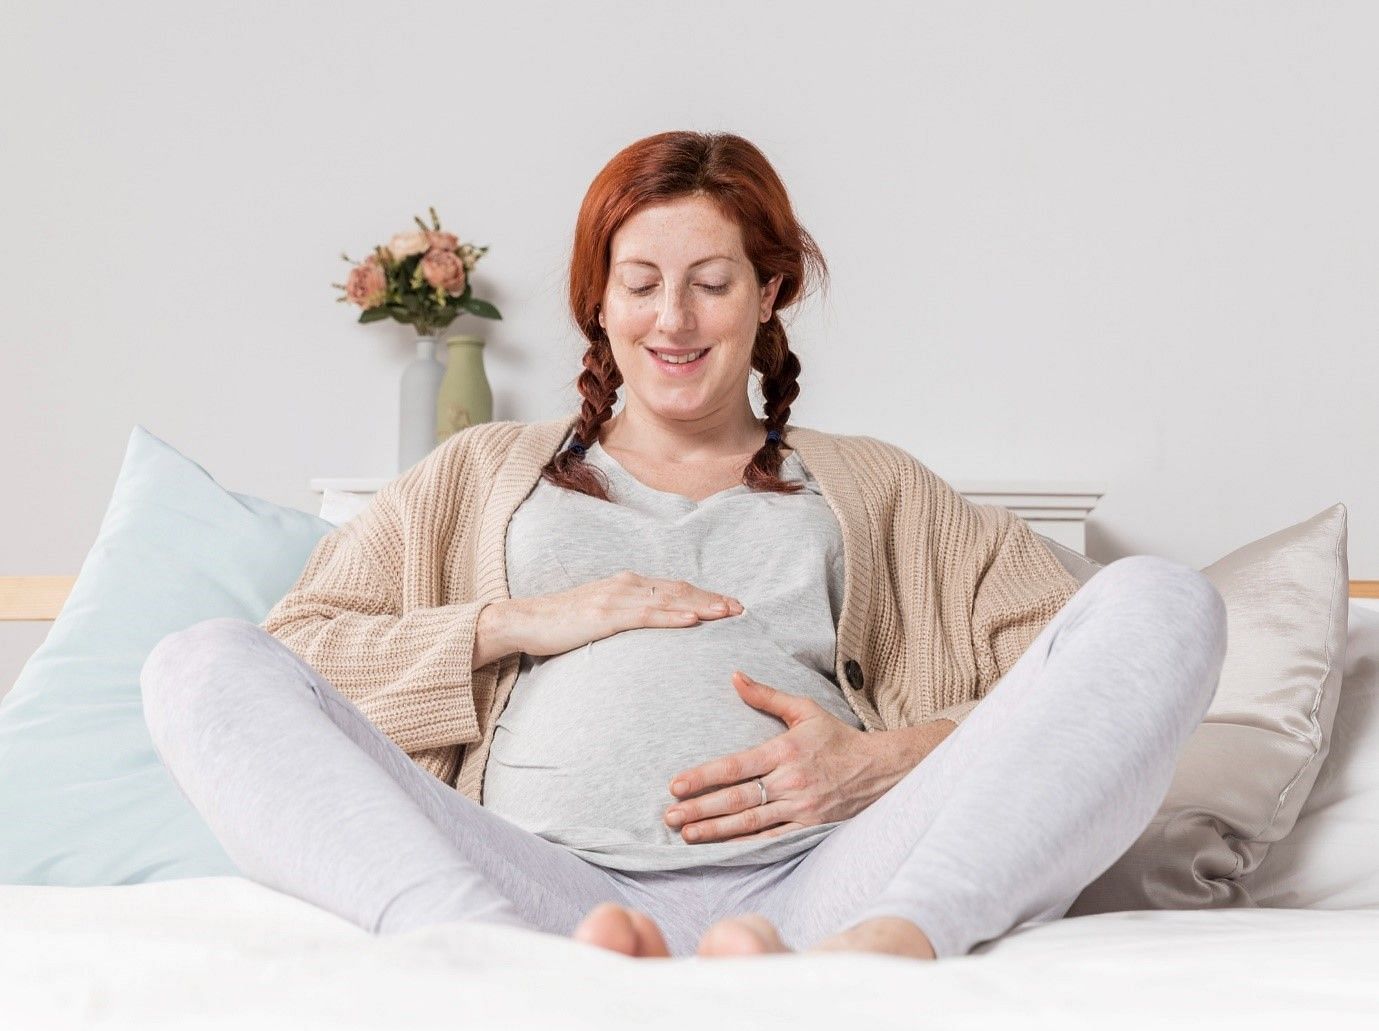 Resting is very important for expecting mothers to avoid sickness (image by freepik on freepik)